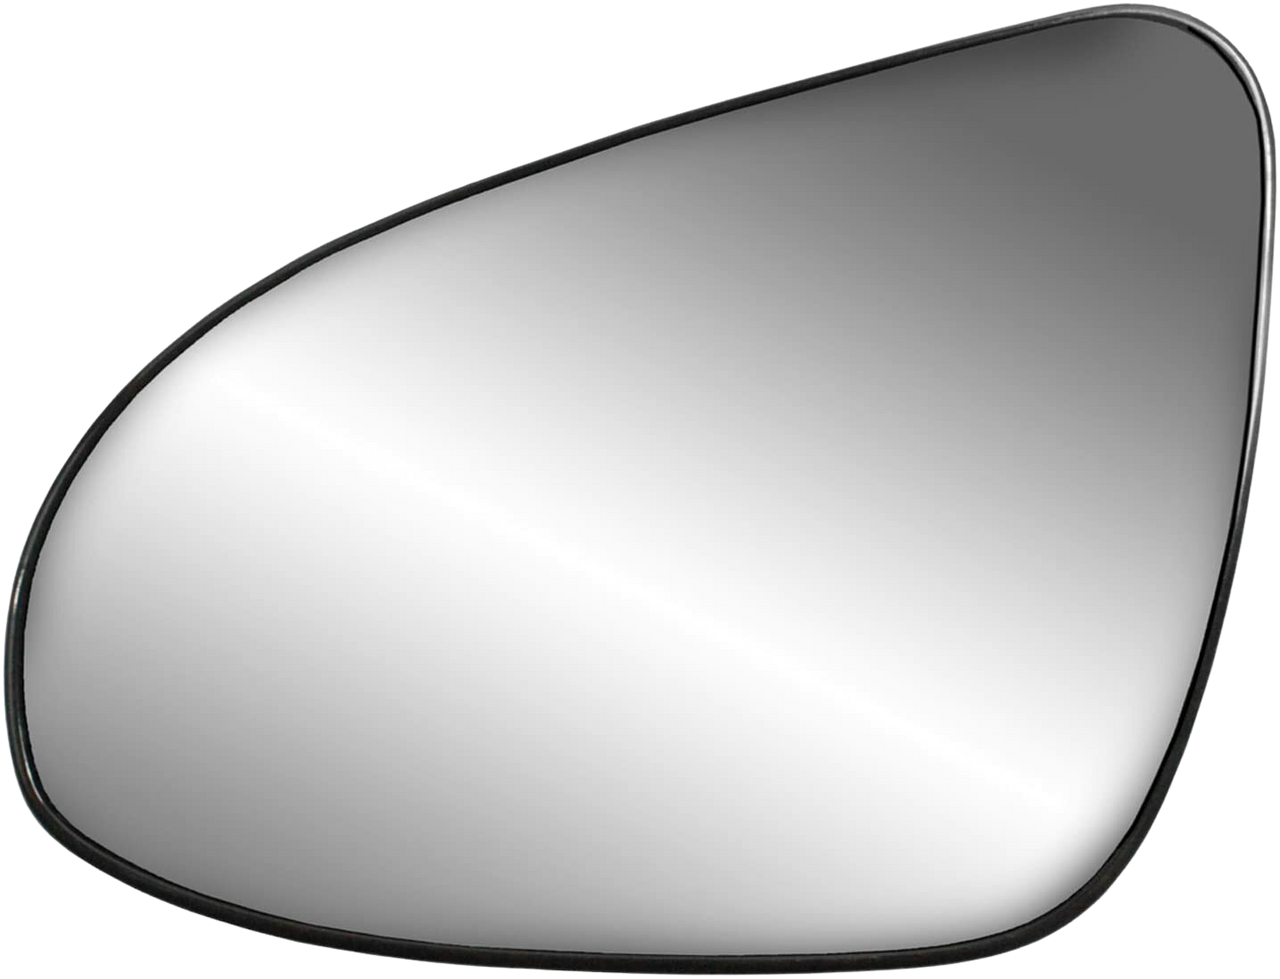 Fit System Driver Side Heated Mirror Glass w/Backing Plate, Toyota Camry, Corolla, Yaris, 4 5/8" x 6 7/8" x 7 15/16", Circular Mount (33281)